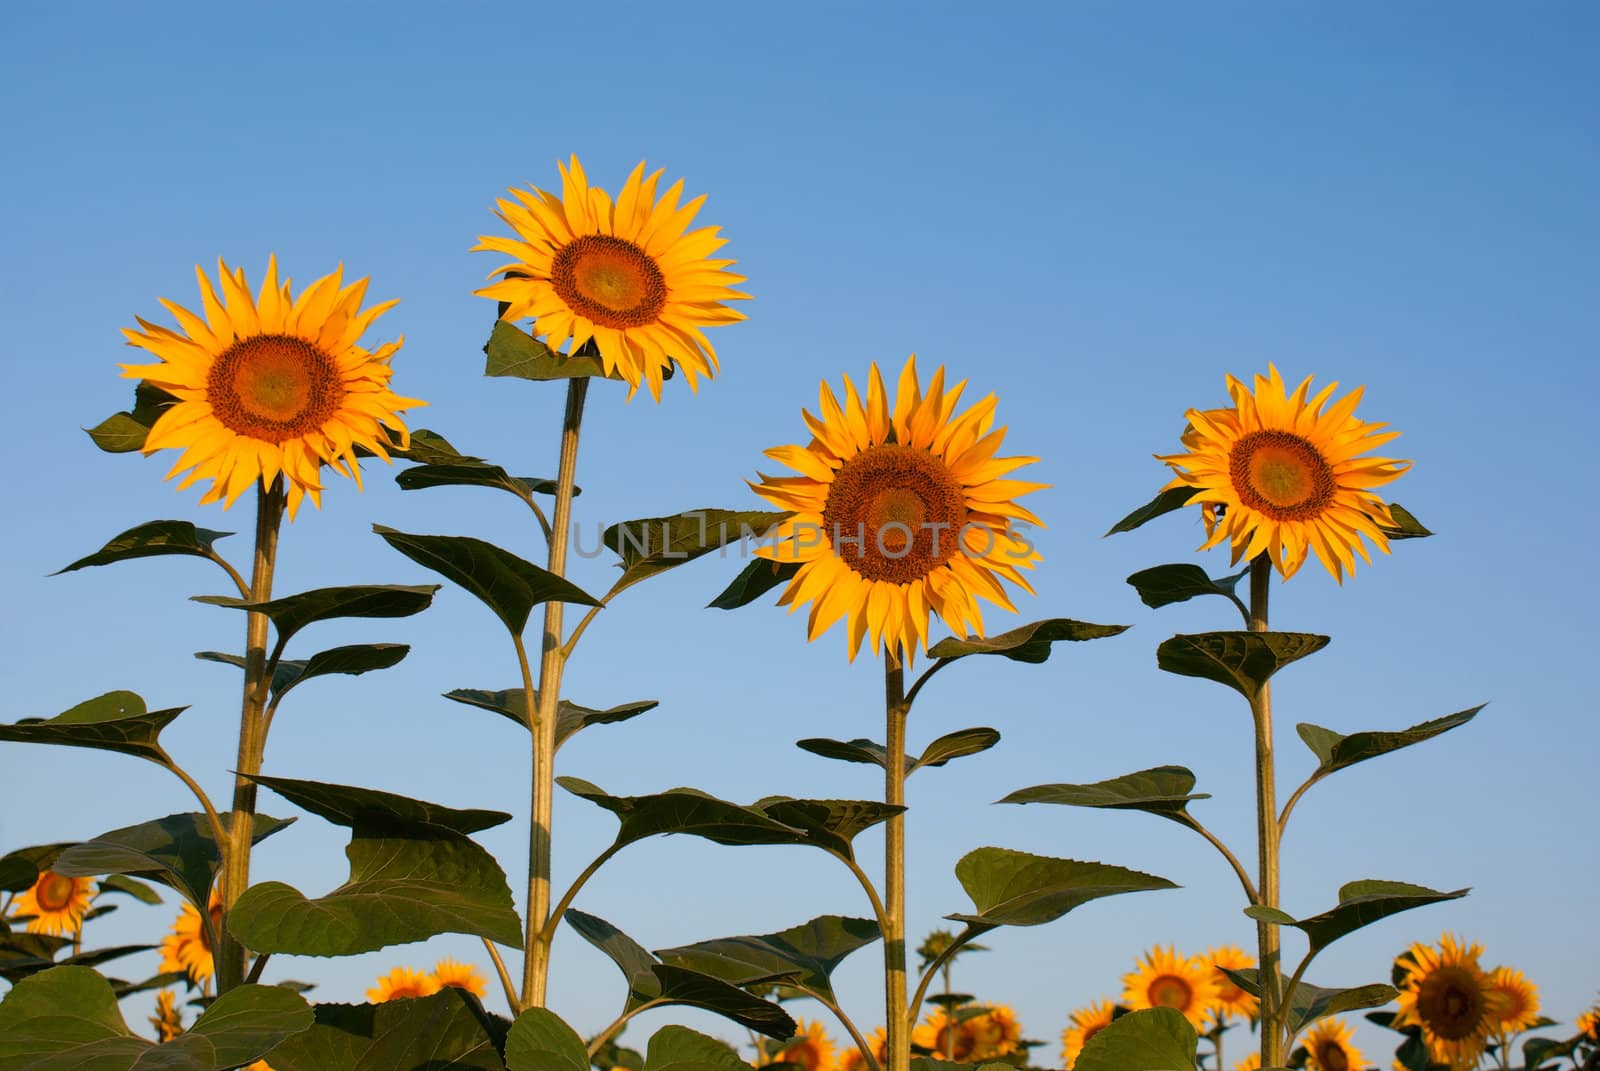 Four sunflowers against blue sky by AndreyKr